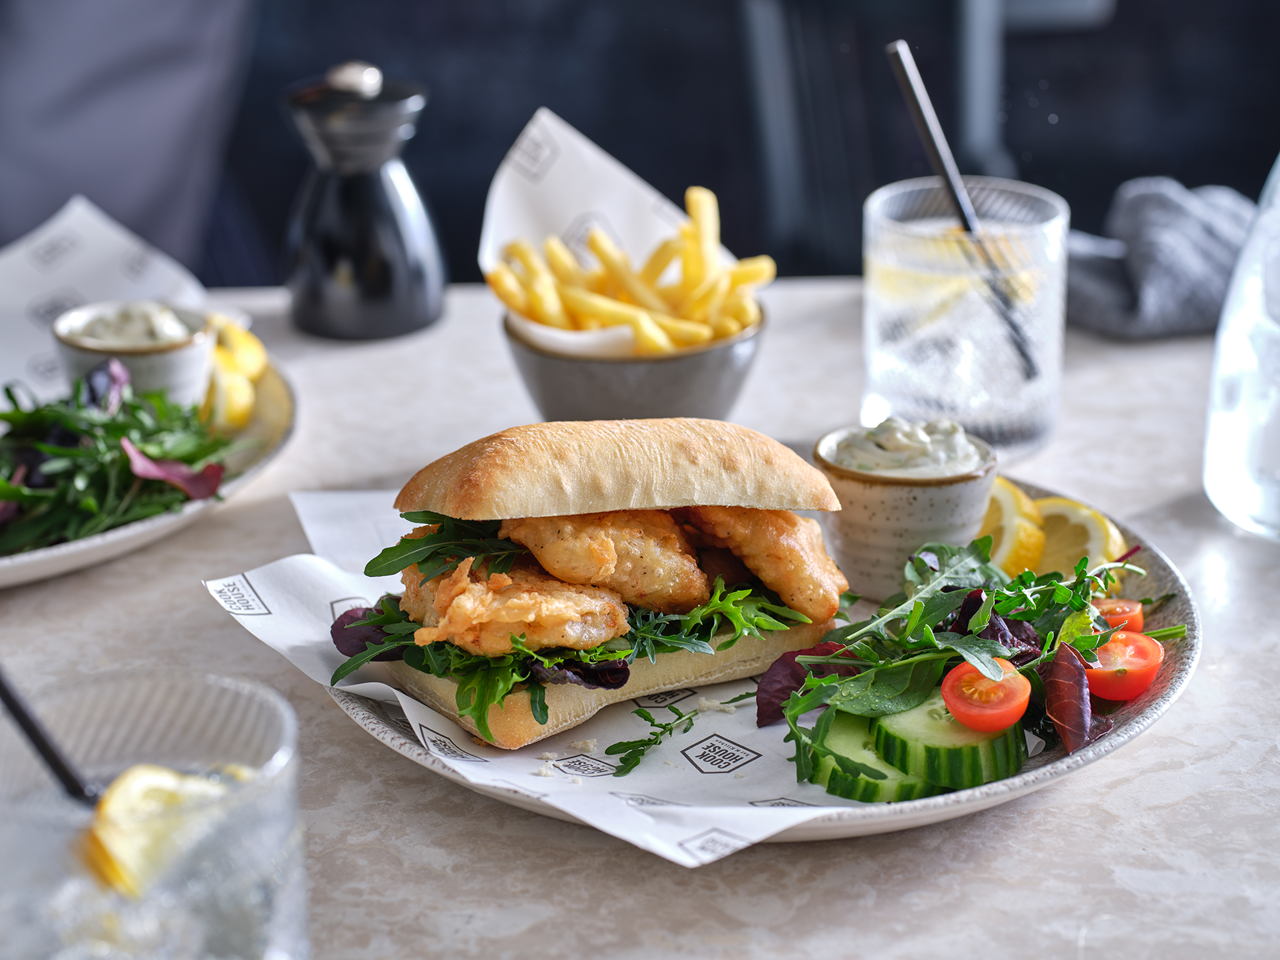 A ciabatta sandwich of battered haddock goujons and green leaves sits on a plate with a side salad, sliced lemon and a pot of tartar sauce. A small bowl of fries can be seen in the background. In the back right and front left there are short glasses containing a clear liquid, lemon slices and a straw.